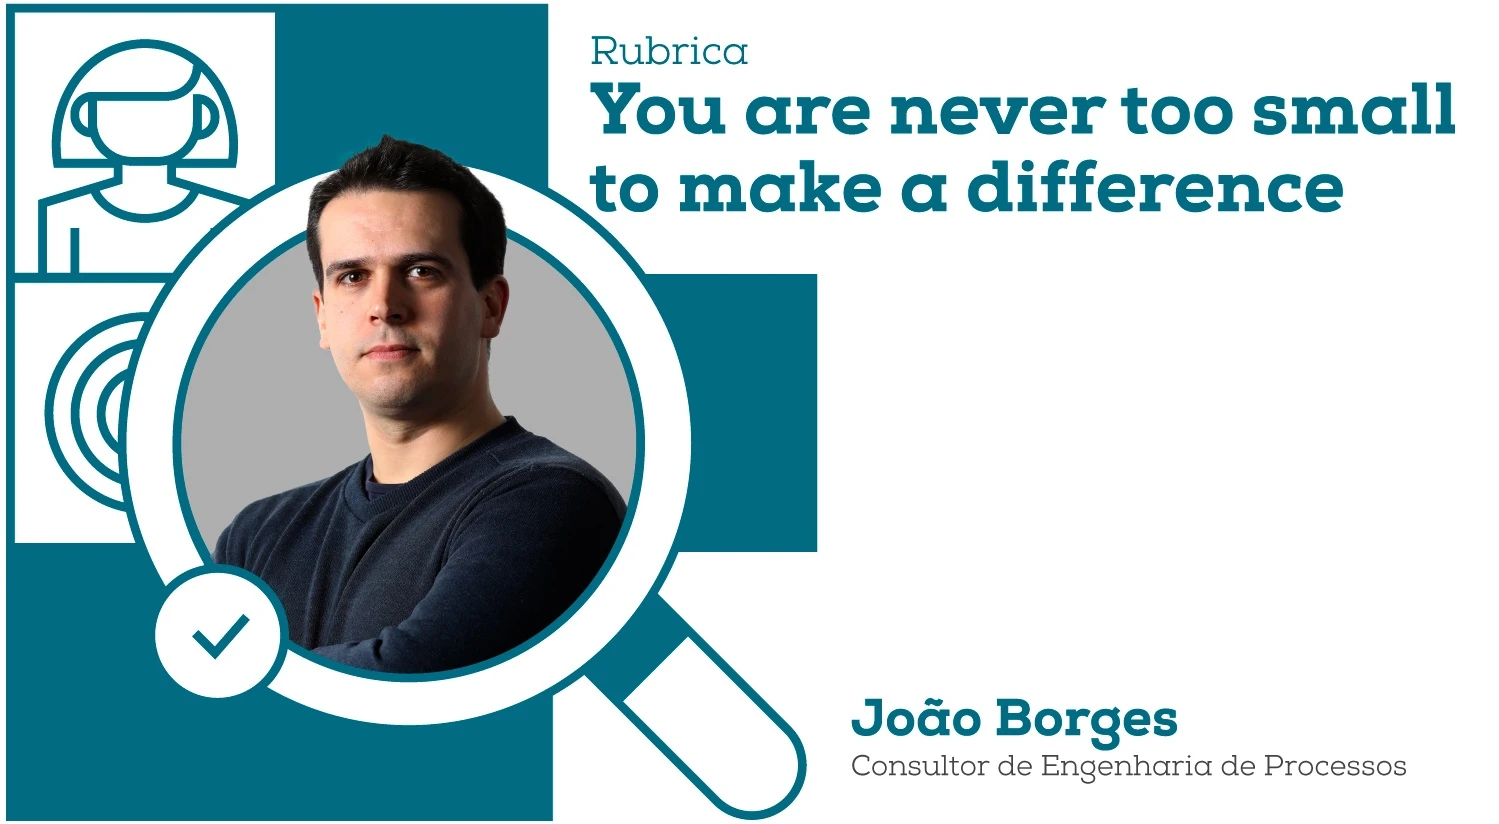 You are never too small to make a difference: Rui Rodrigues